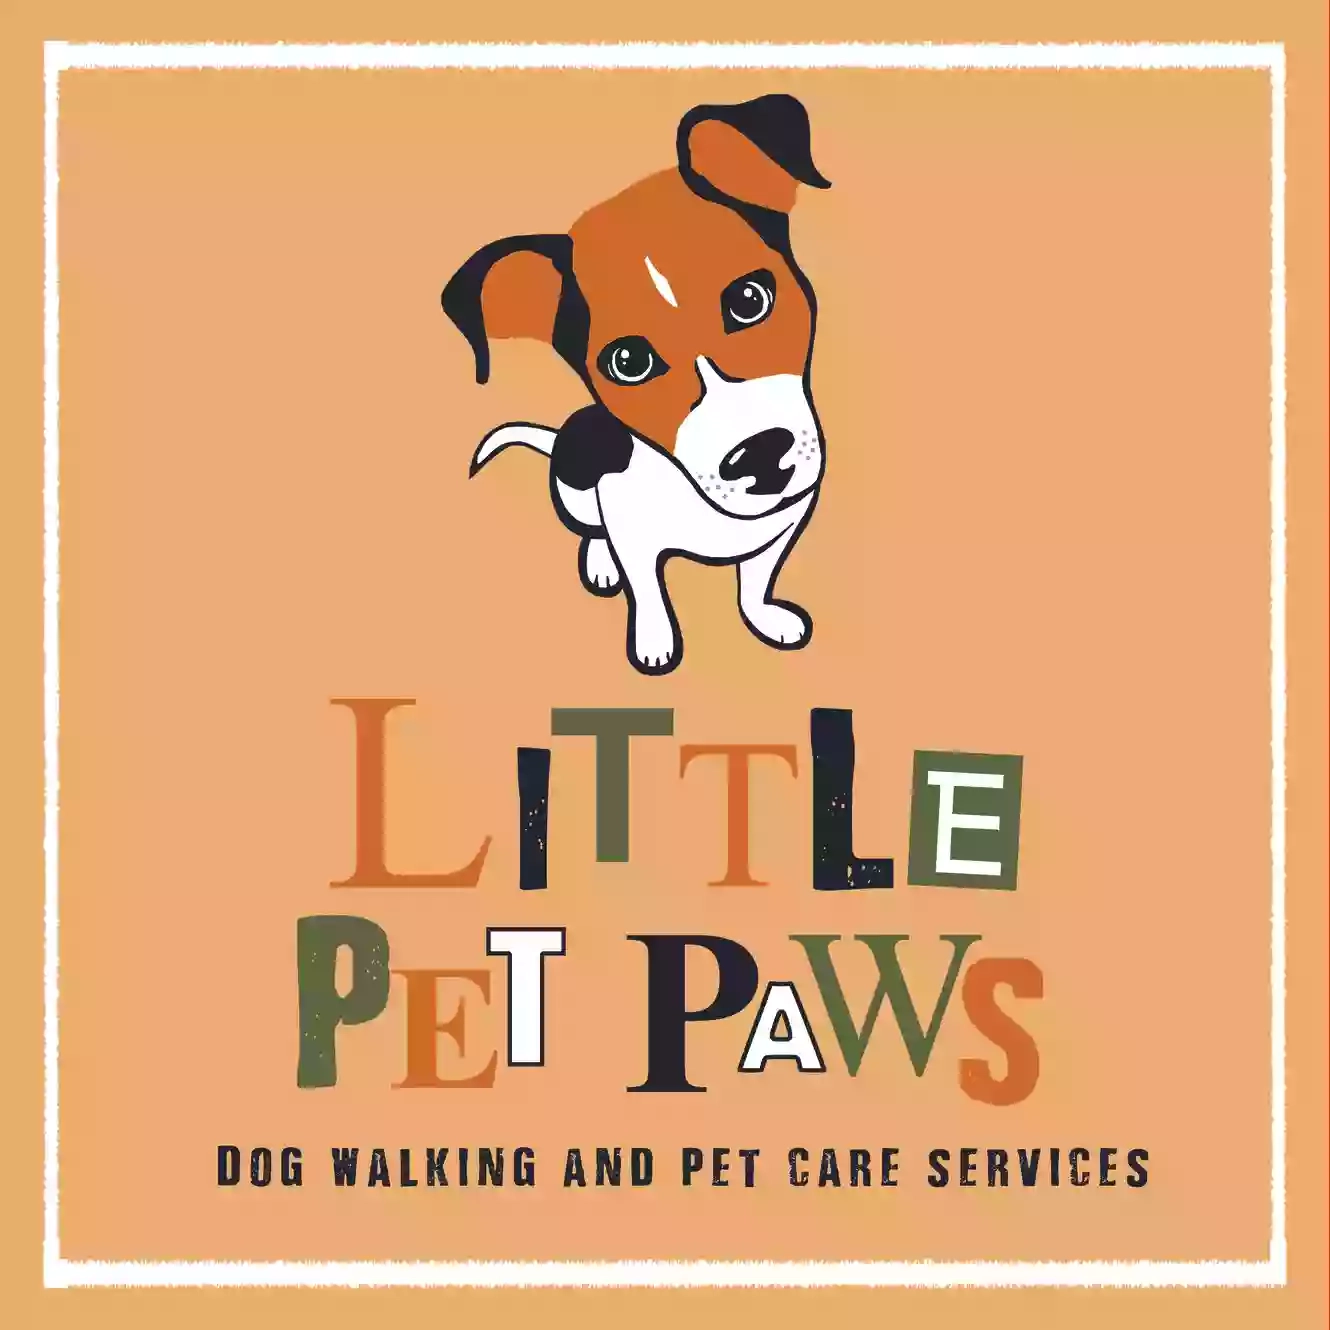 Little Pet Paws - Dog Walker and Pet Care Services